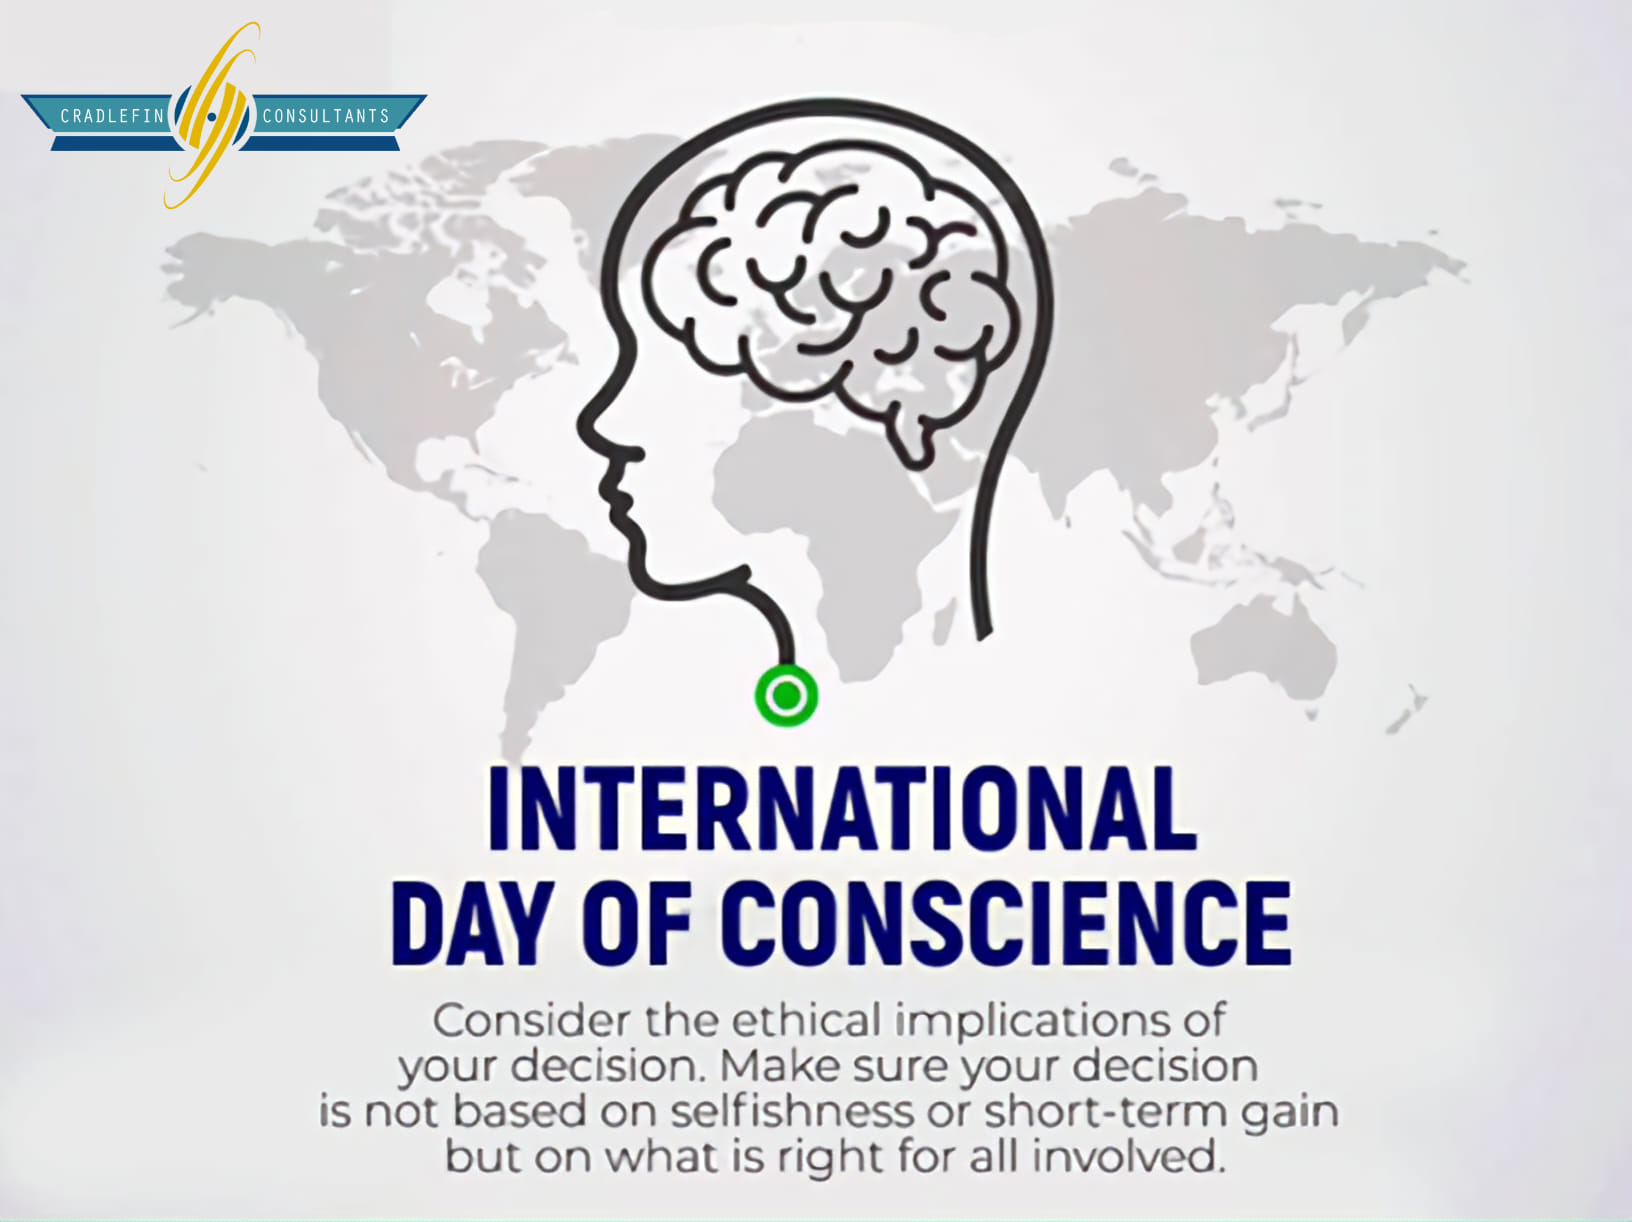 International Day of Conscience